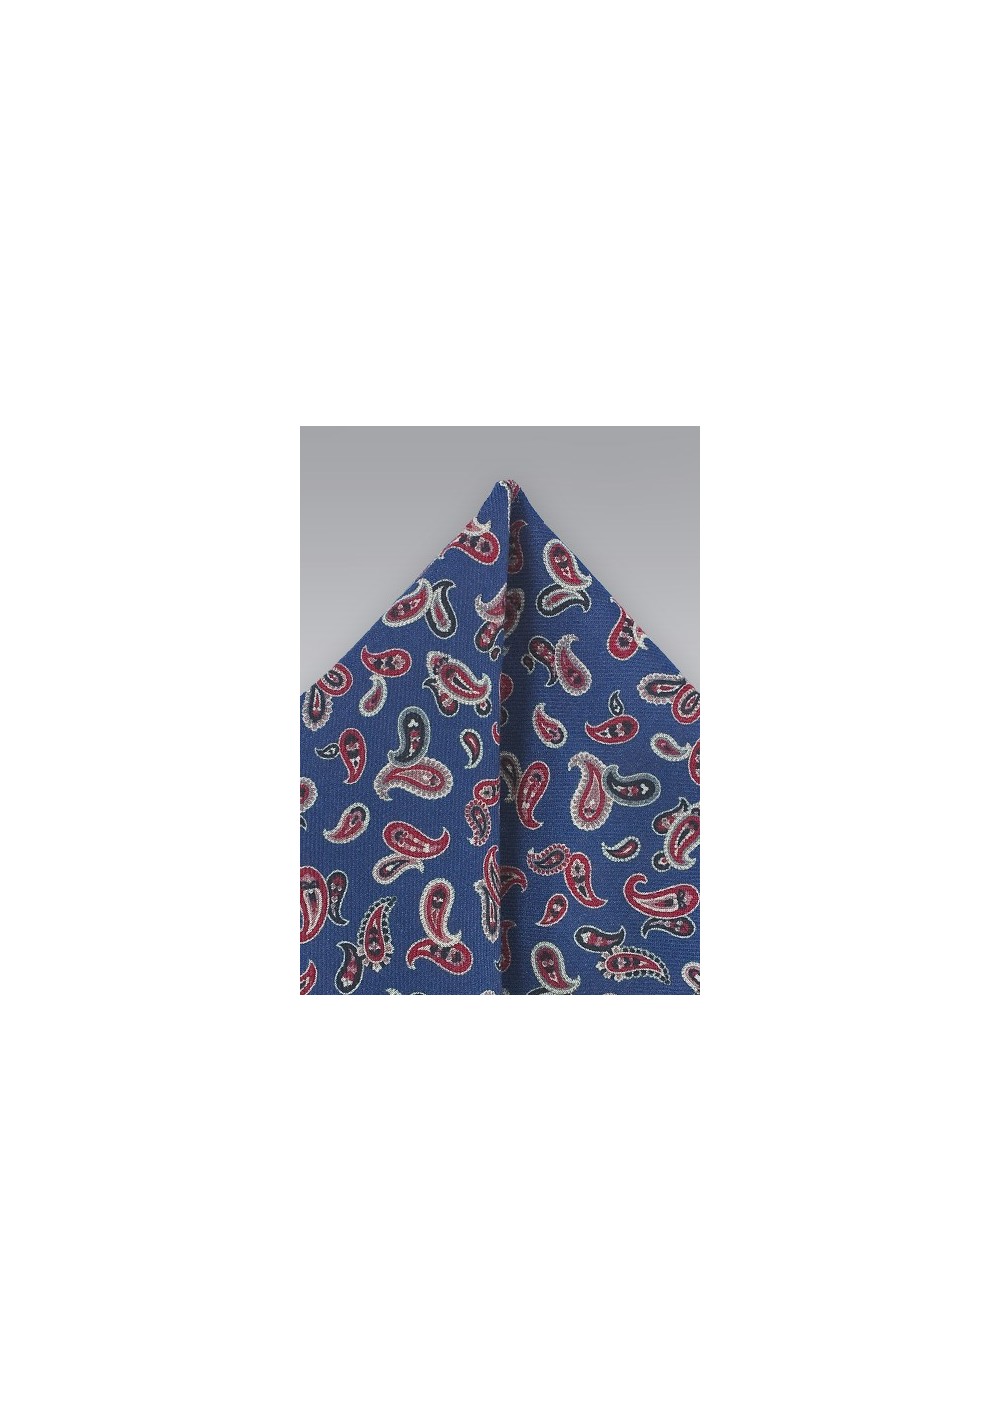 Red and Blue Wool Pocket Square with Paisley Print